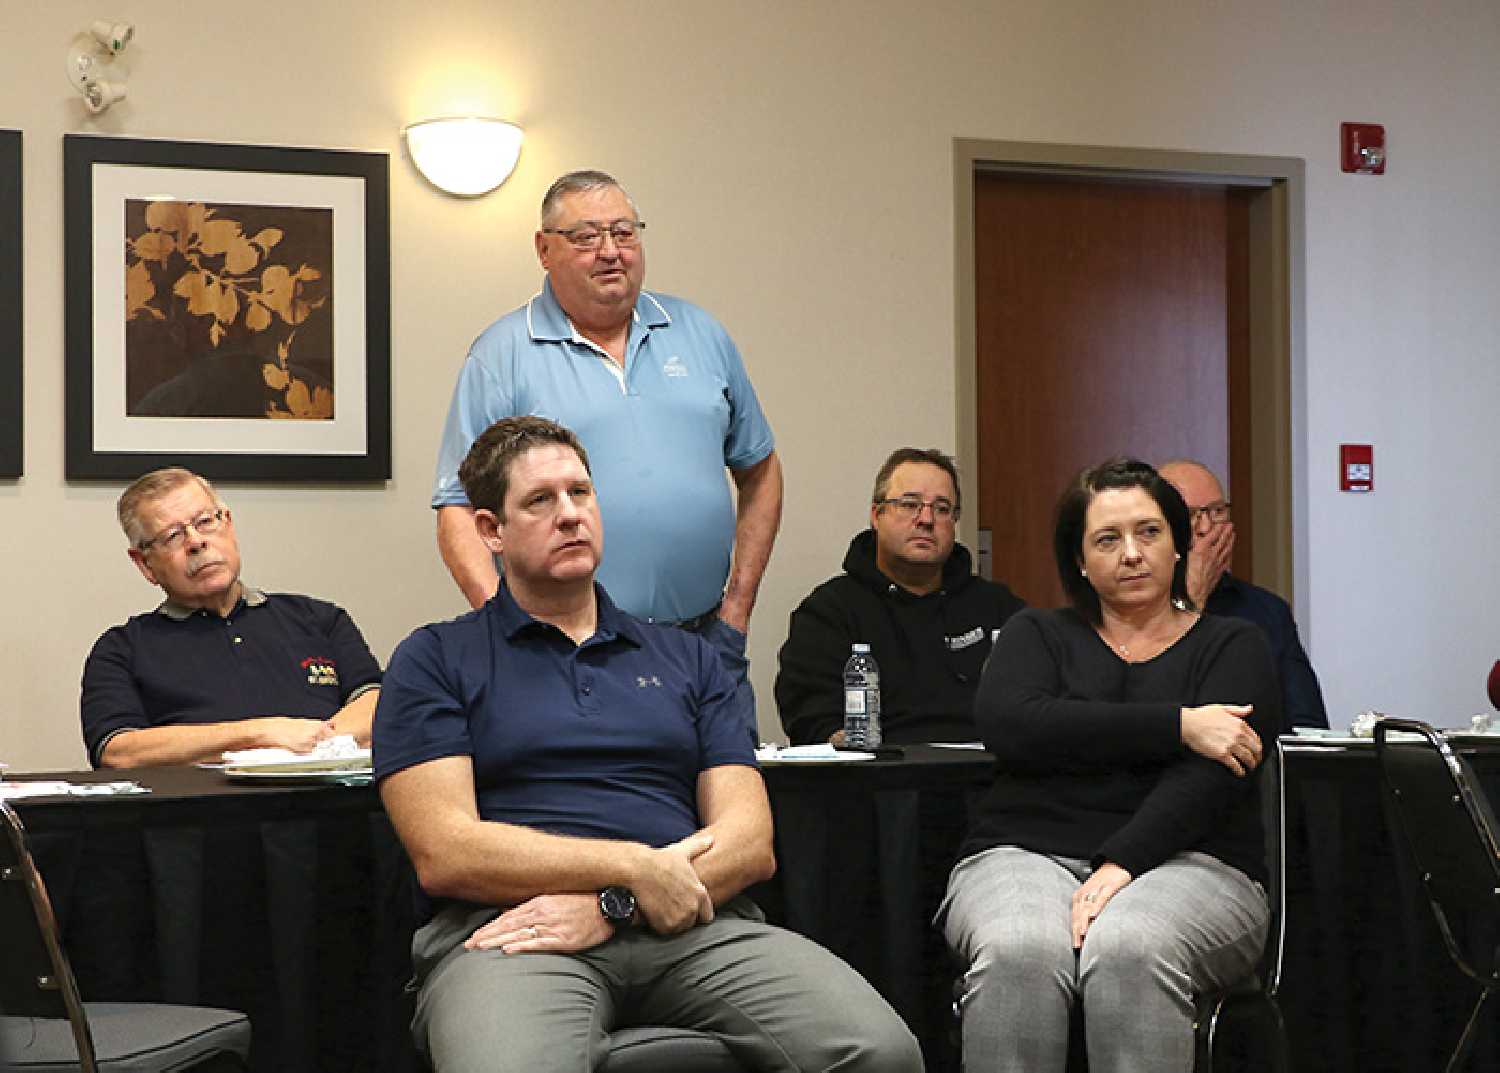 The Mayor of Moosomin Larry Tomlinson informed Chamber members about the town’s push for getting its 2021 census numbers corrected. Members in the room also expressed their concerns about the issue.  